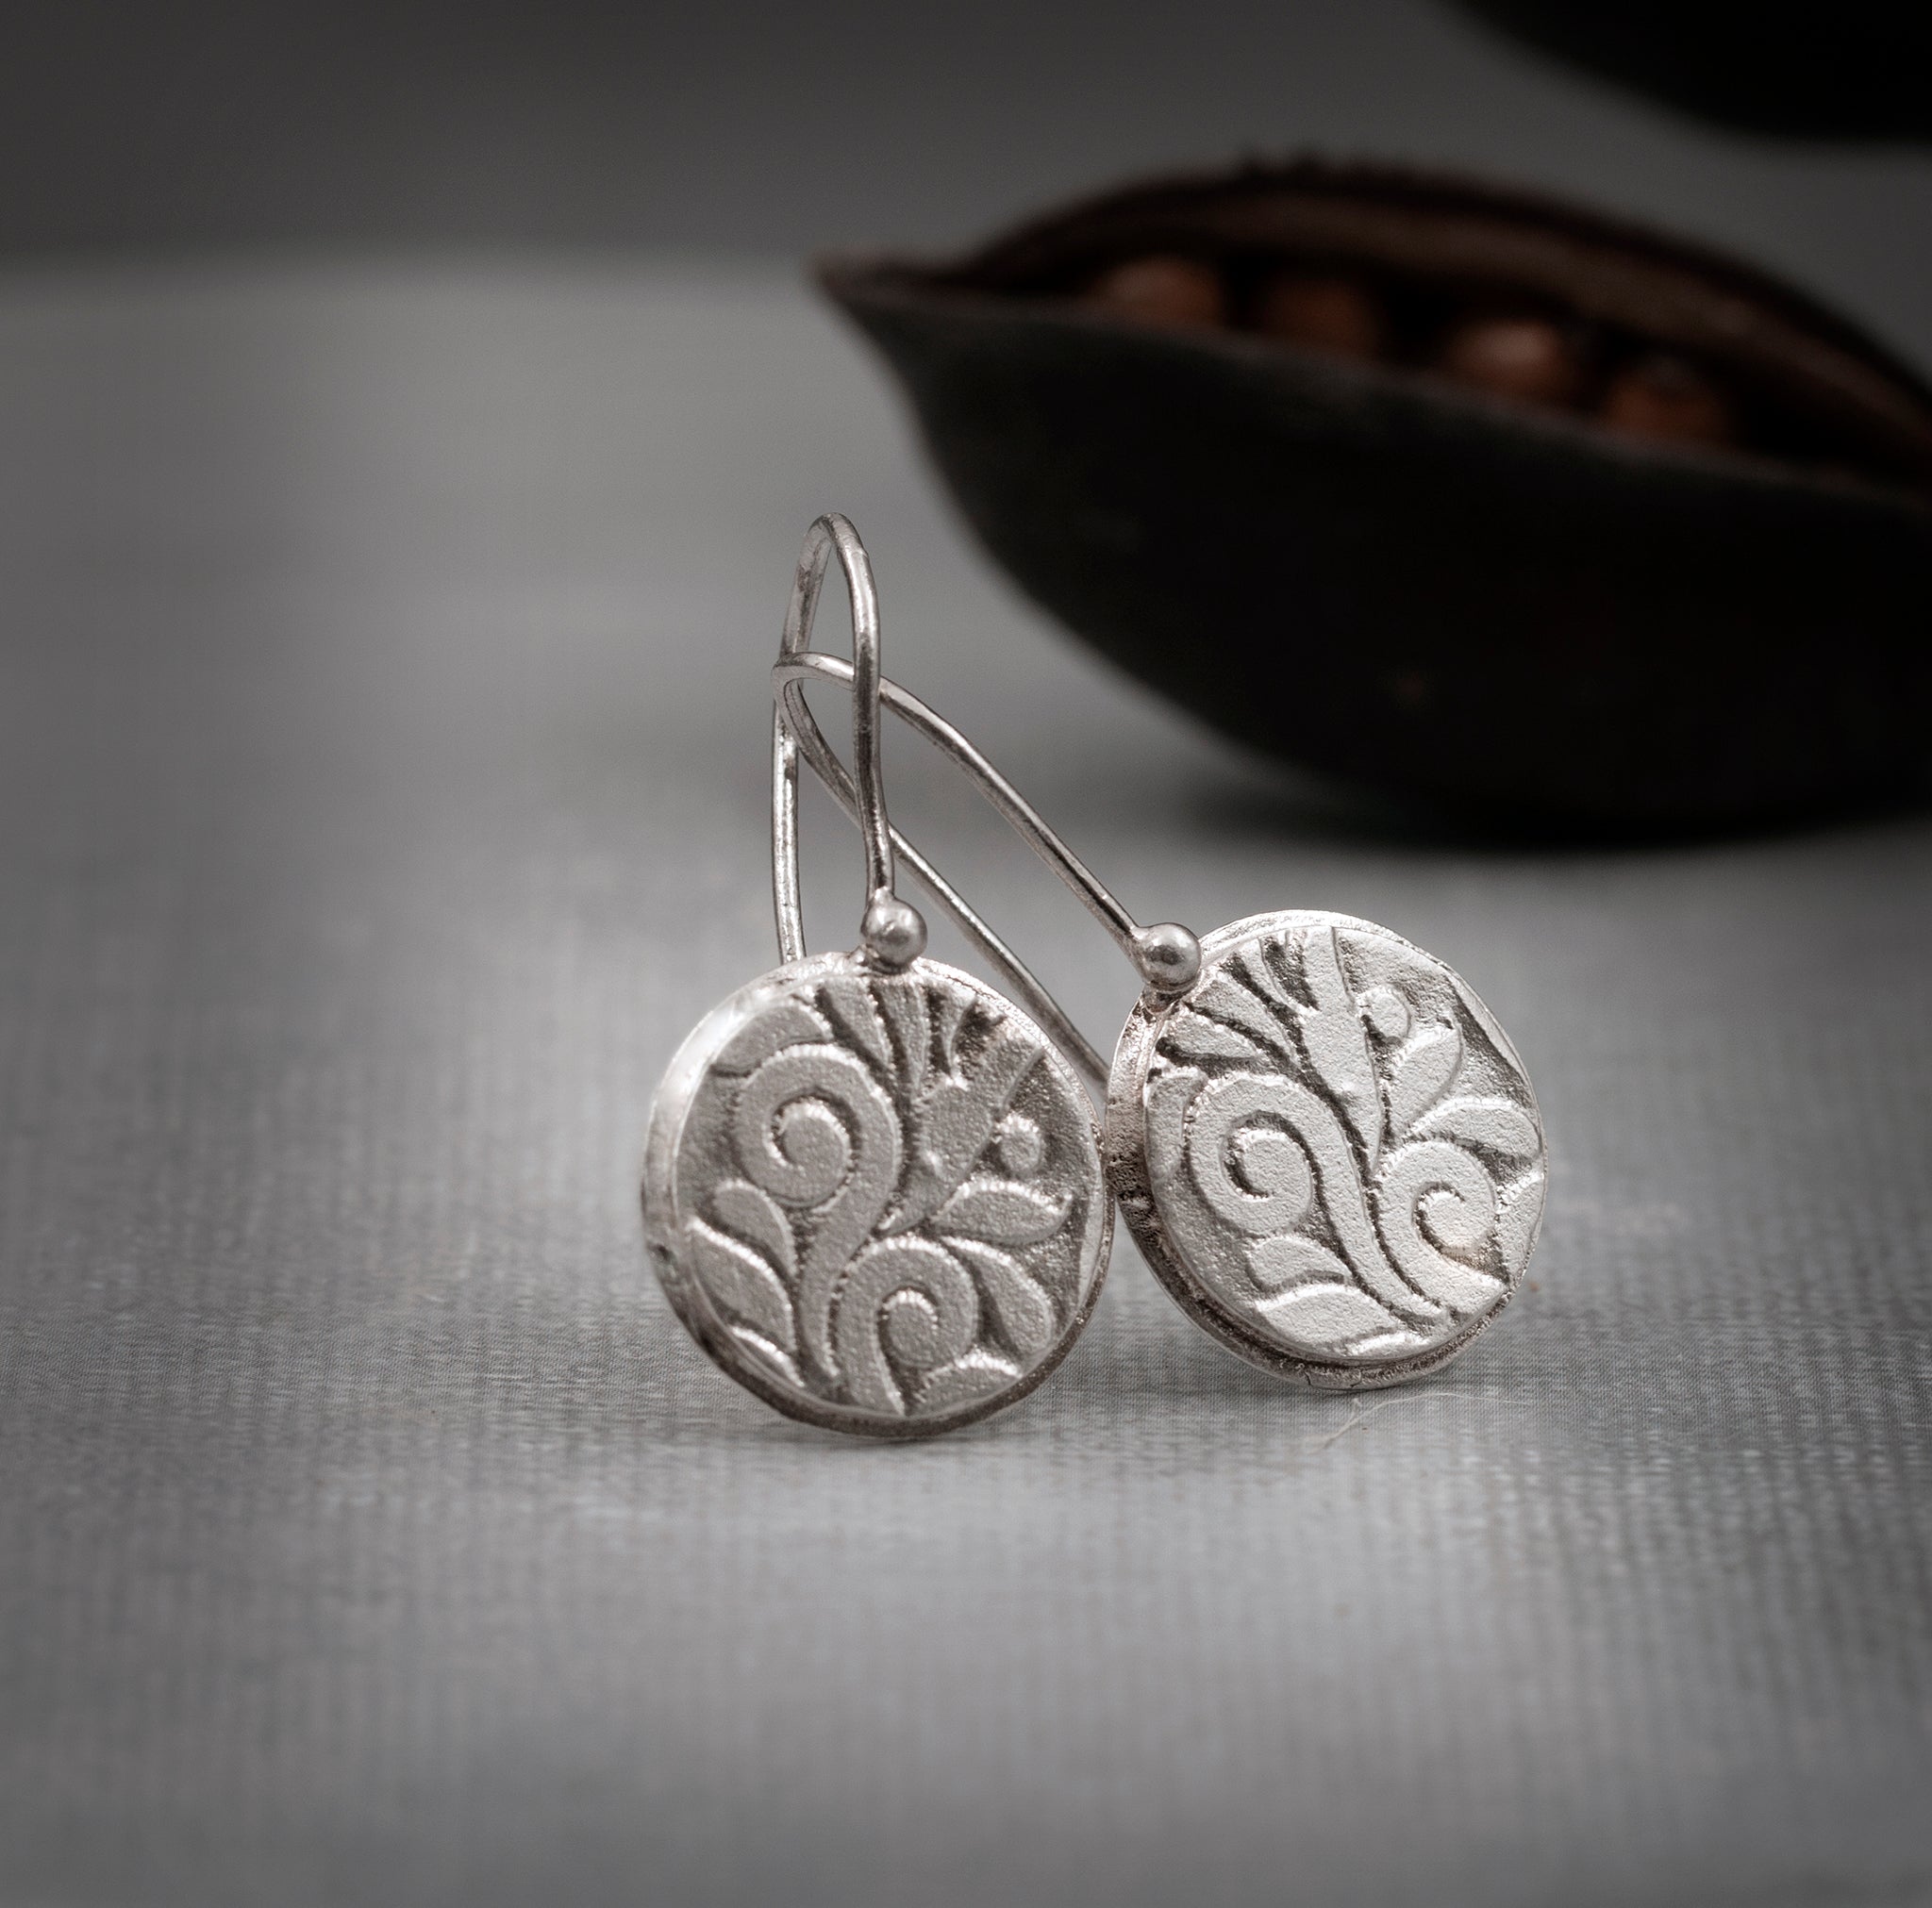 Artisan Sterling Silver Earrings - Classic Hook Earrings - Fashionable Dangling Earrings for Parties, Everyday Jewelry, Gifts for Her - Statement Jewelry with Customizable Finish